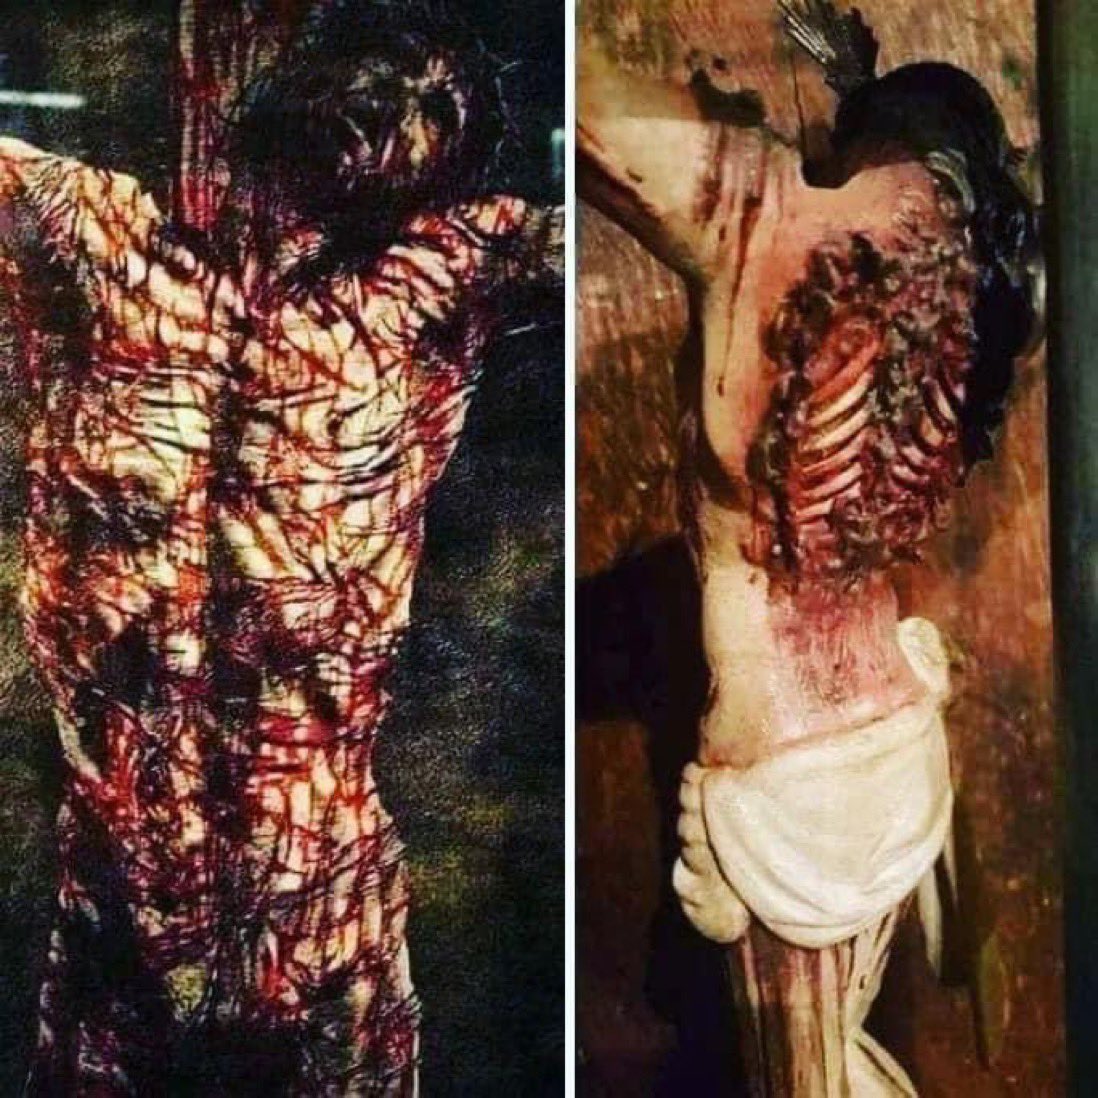 In 1986, The American Medical Association published an article titled 'The Physical Death of Jesus Christ'. It details the entire process of Jesus' trial to His death on the cross. In Luke 22, before Jesus is arrested, it is written that He was in great distress & sweating…